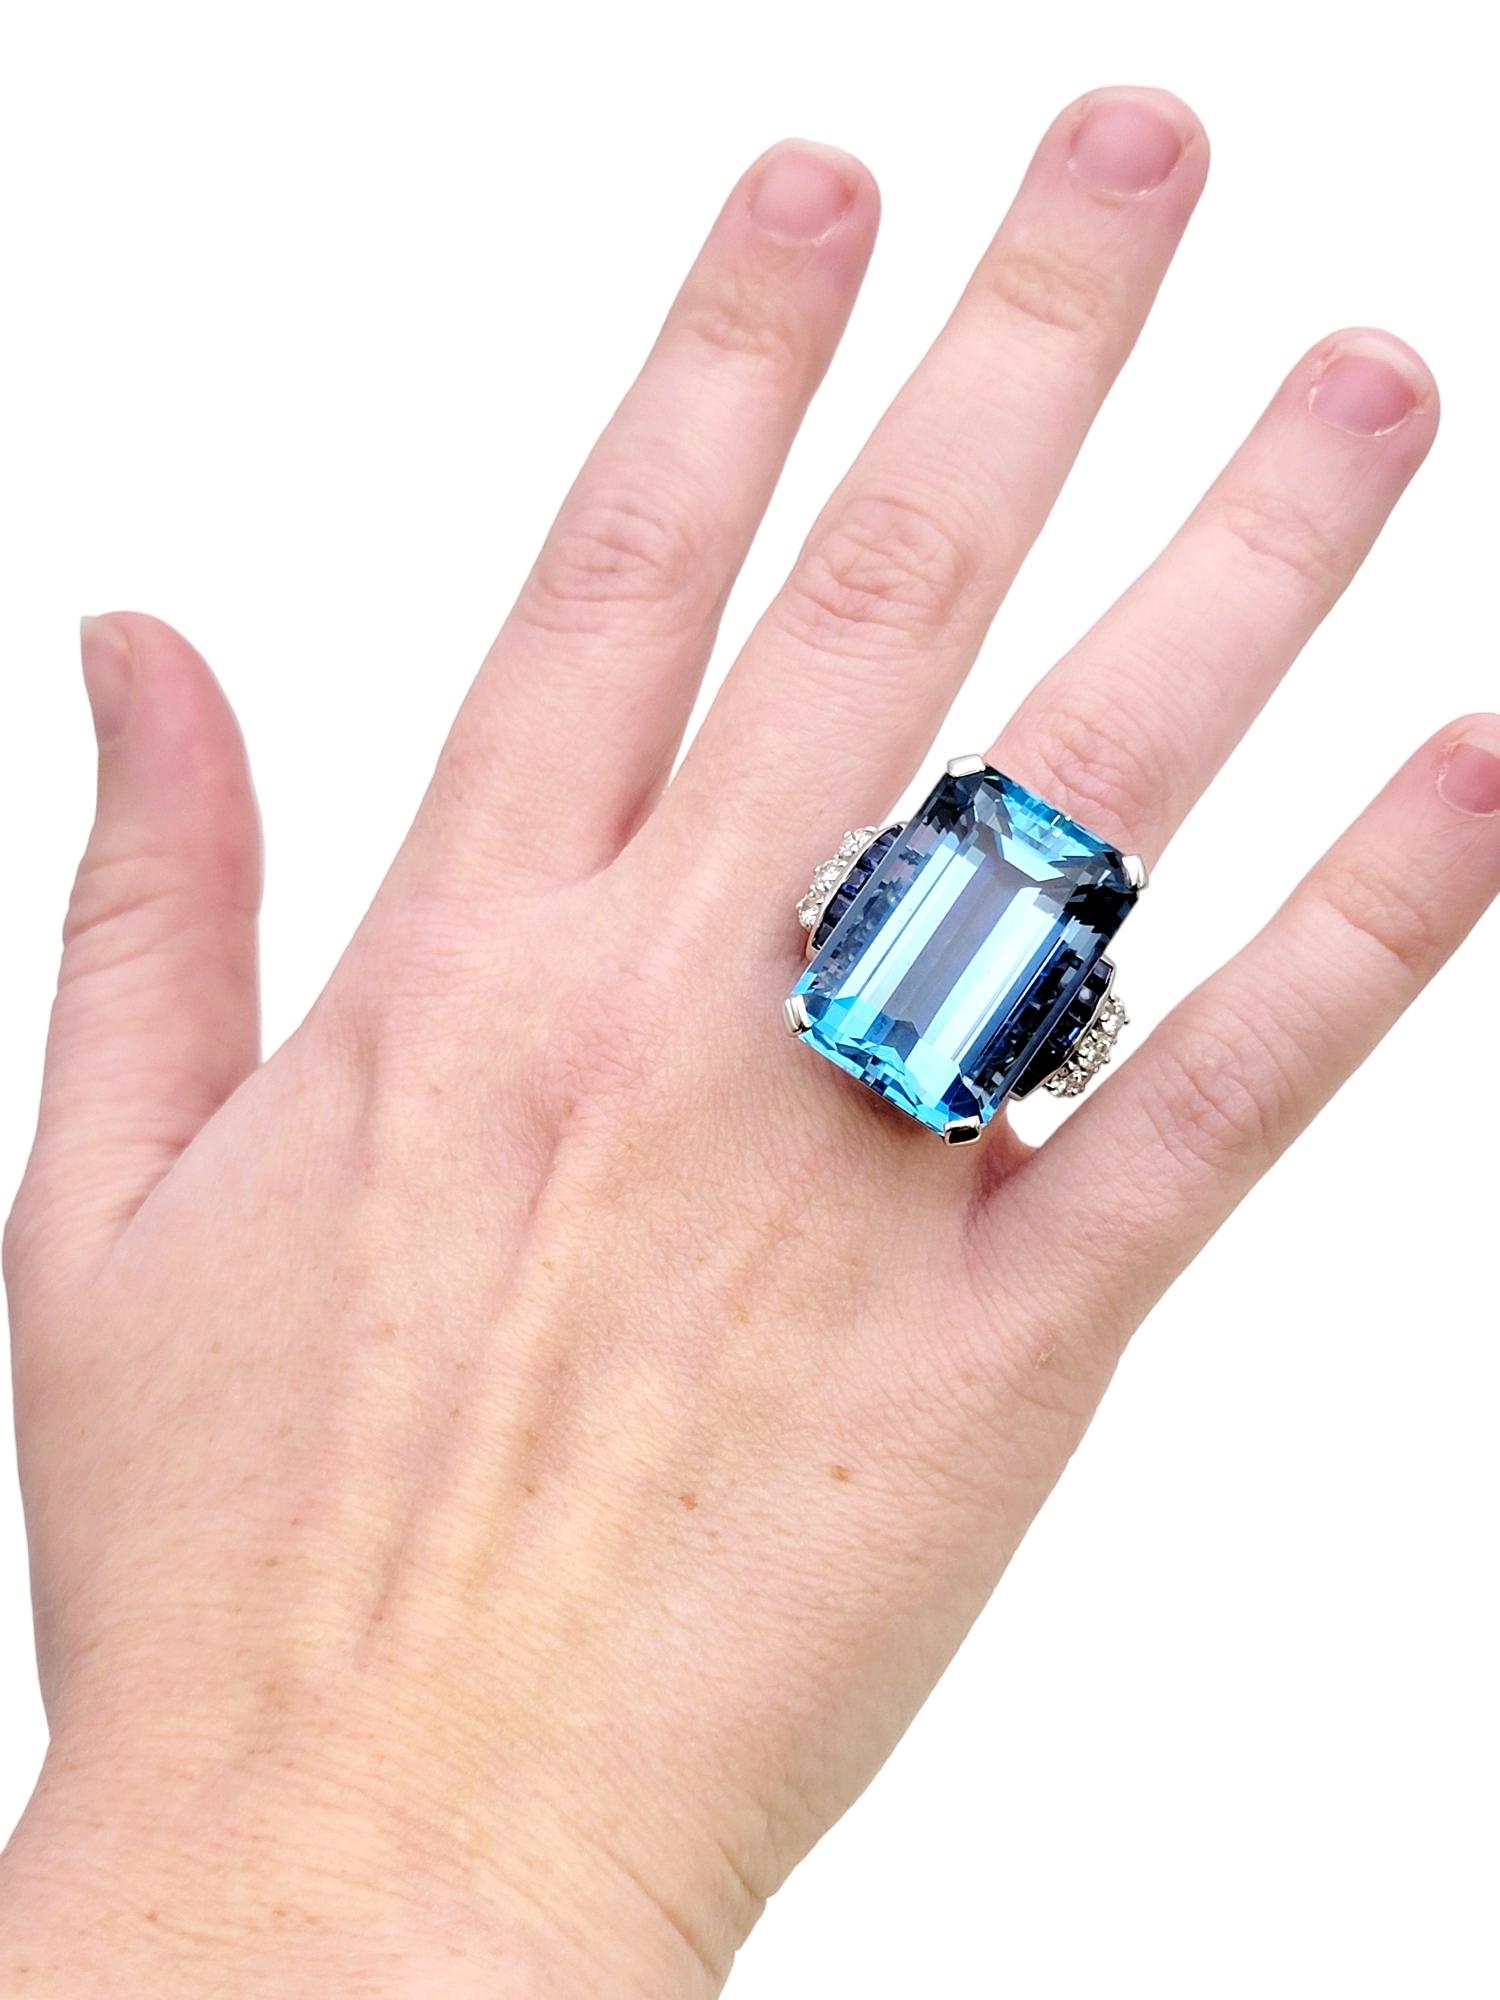 Huge Emerald Cut Aquamarine Ring with Sapphire and Diamond Accents in Platinum For Sale 4